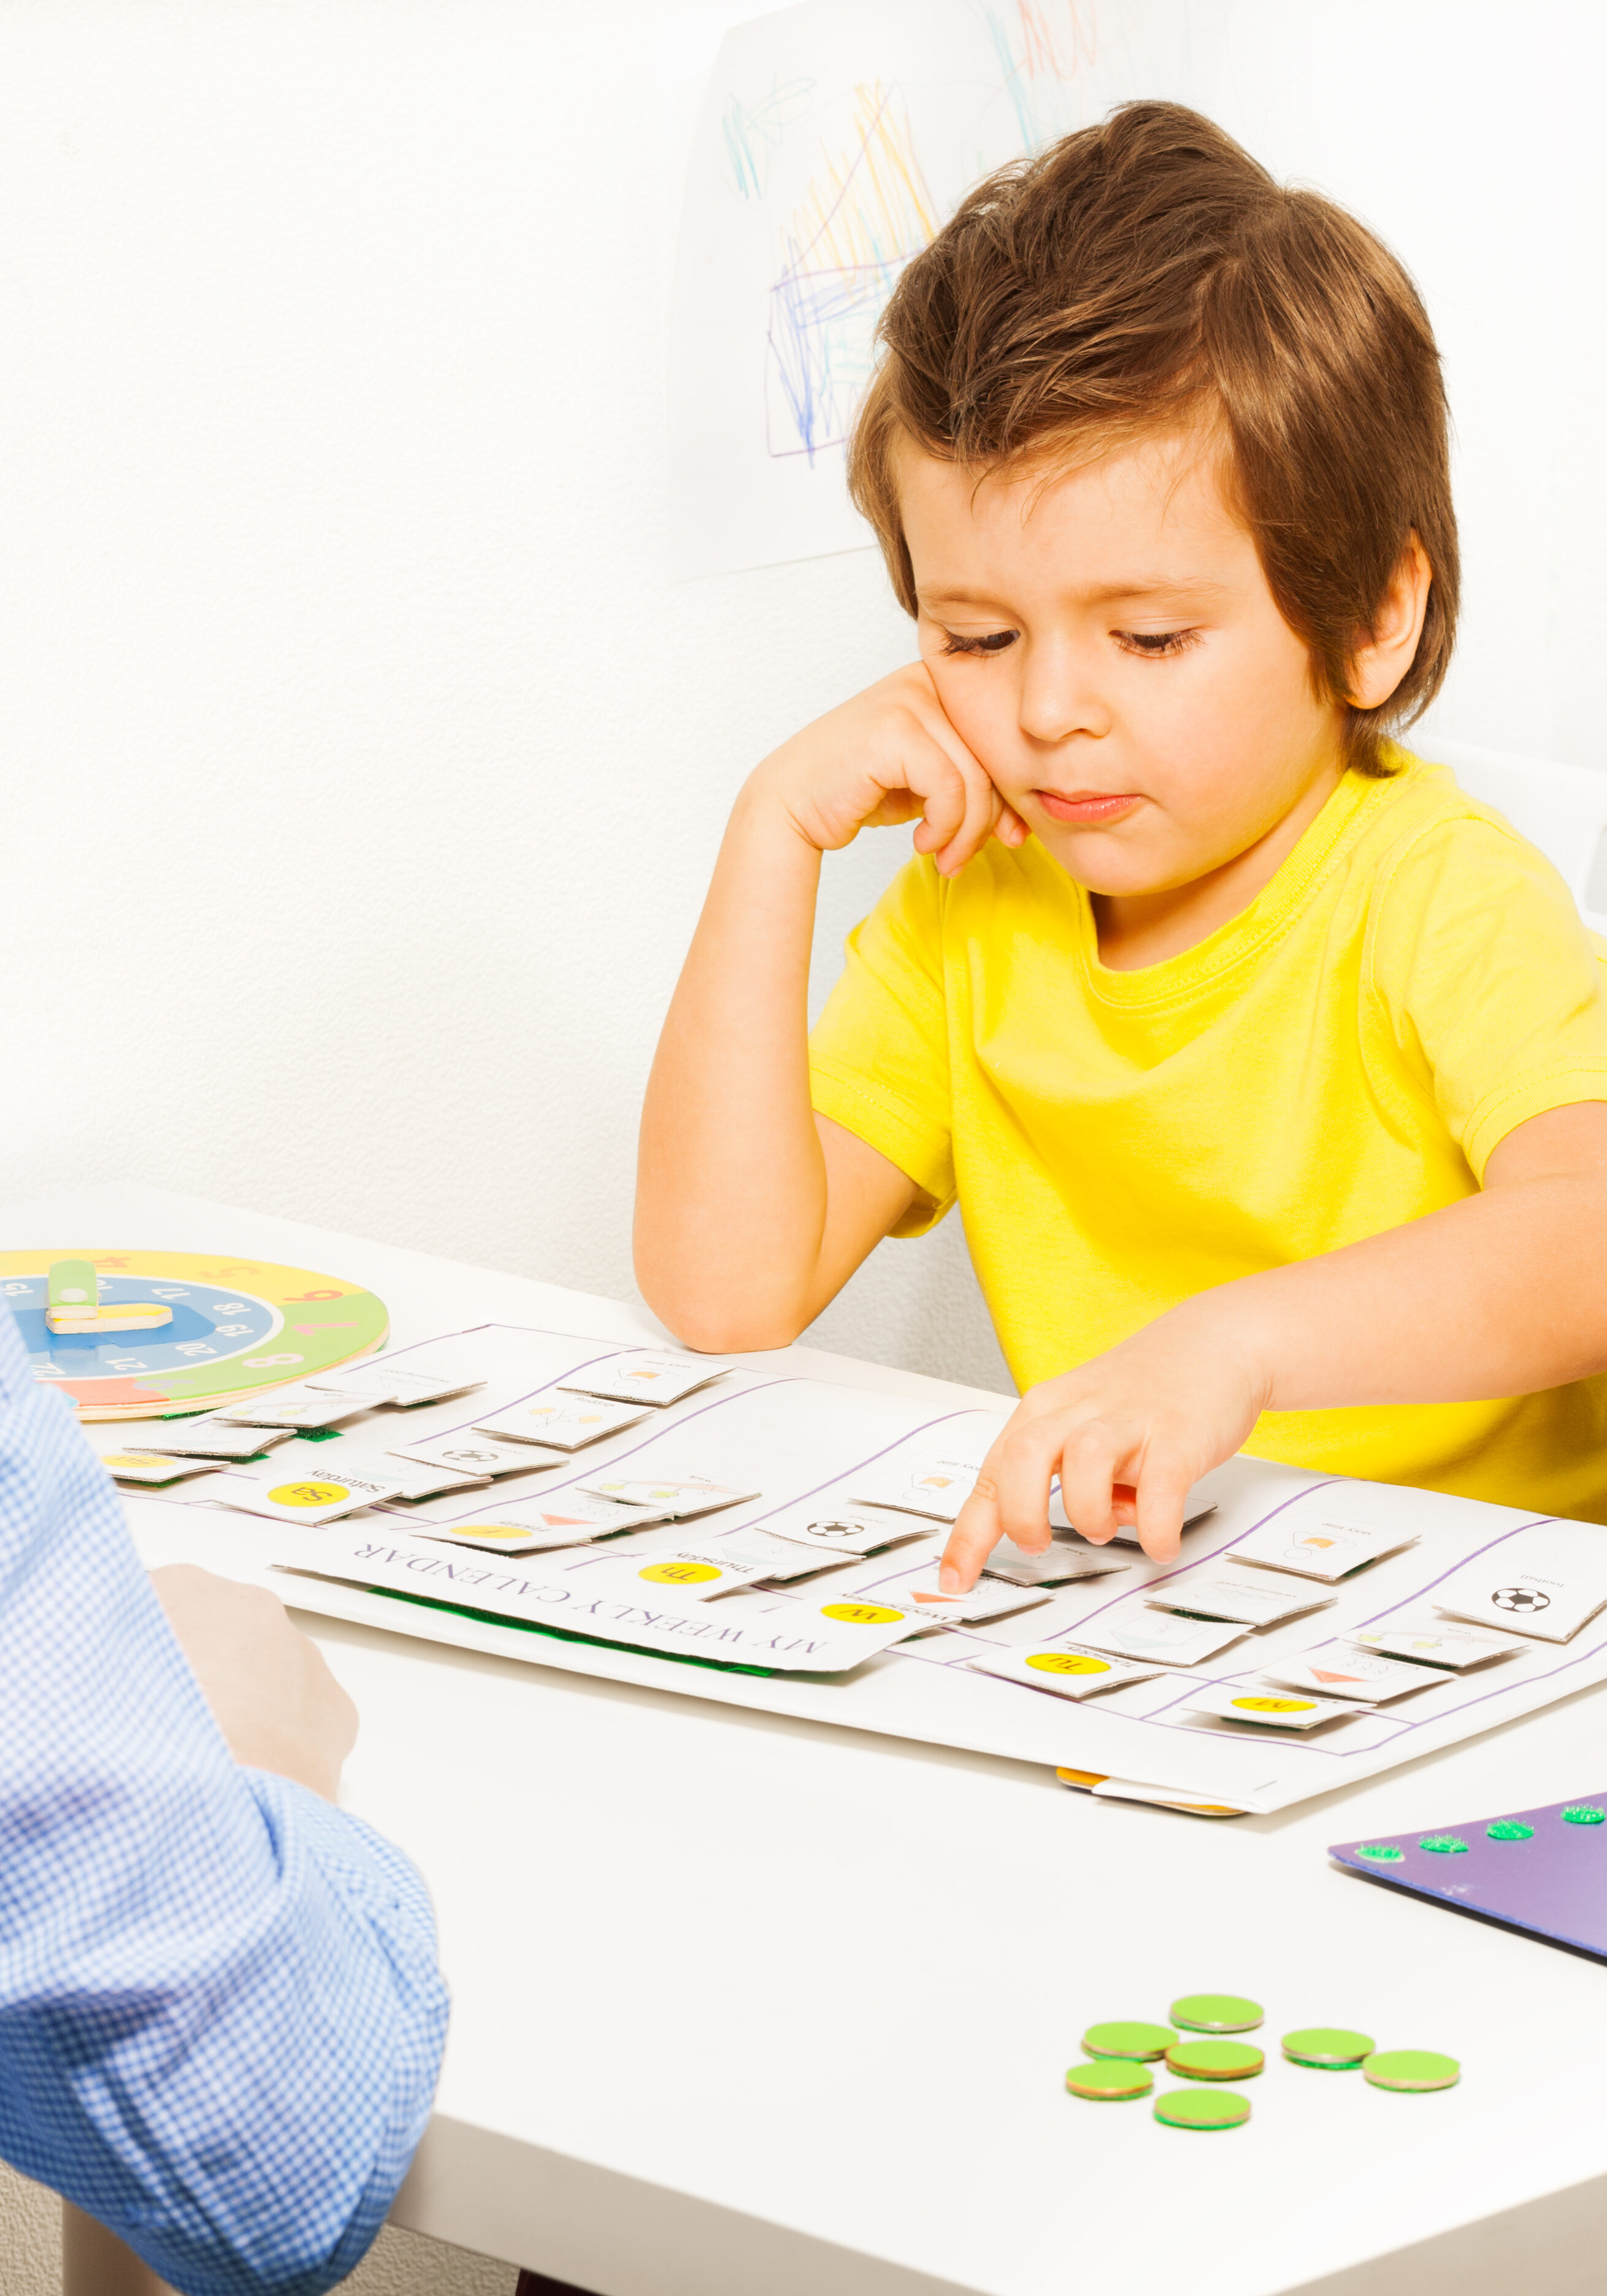 Boy pointing at colorful day activities cards on calendar during developing game with his parent sitting opposite at the table in the room